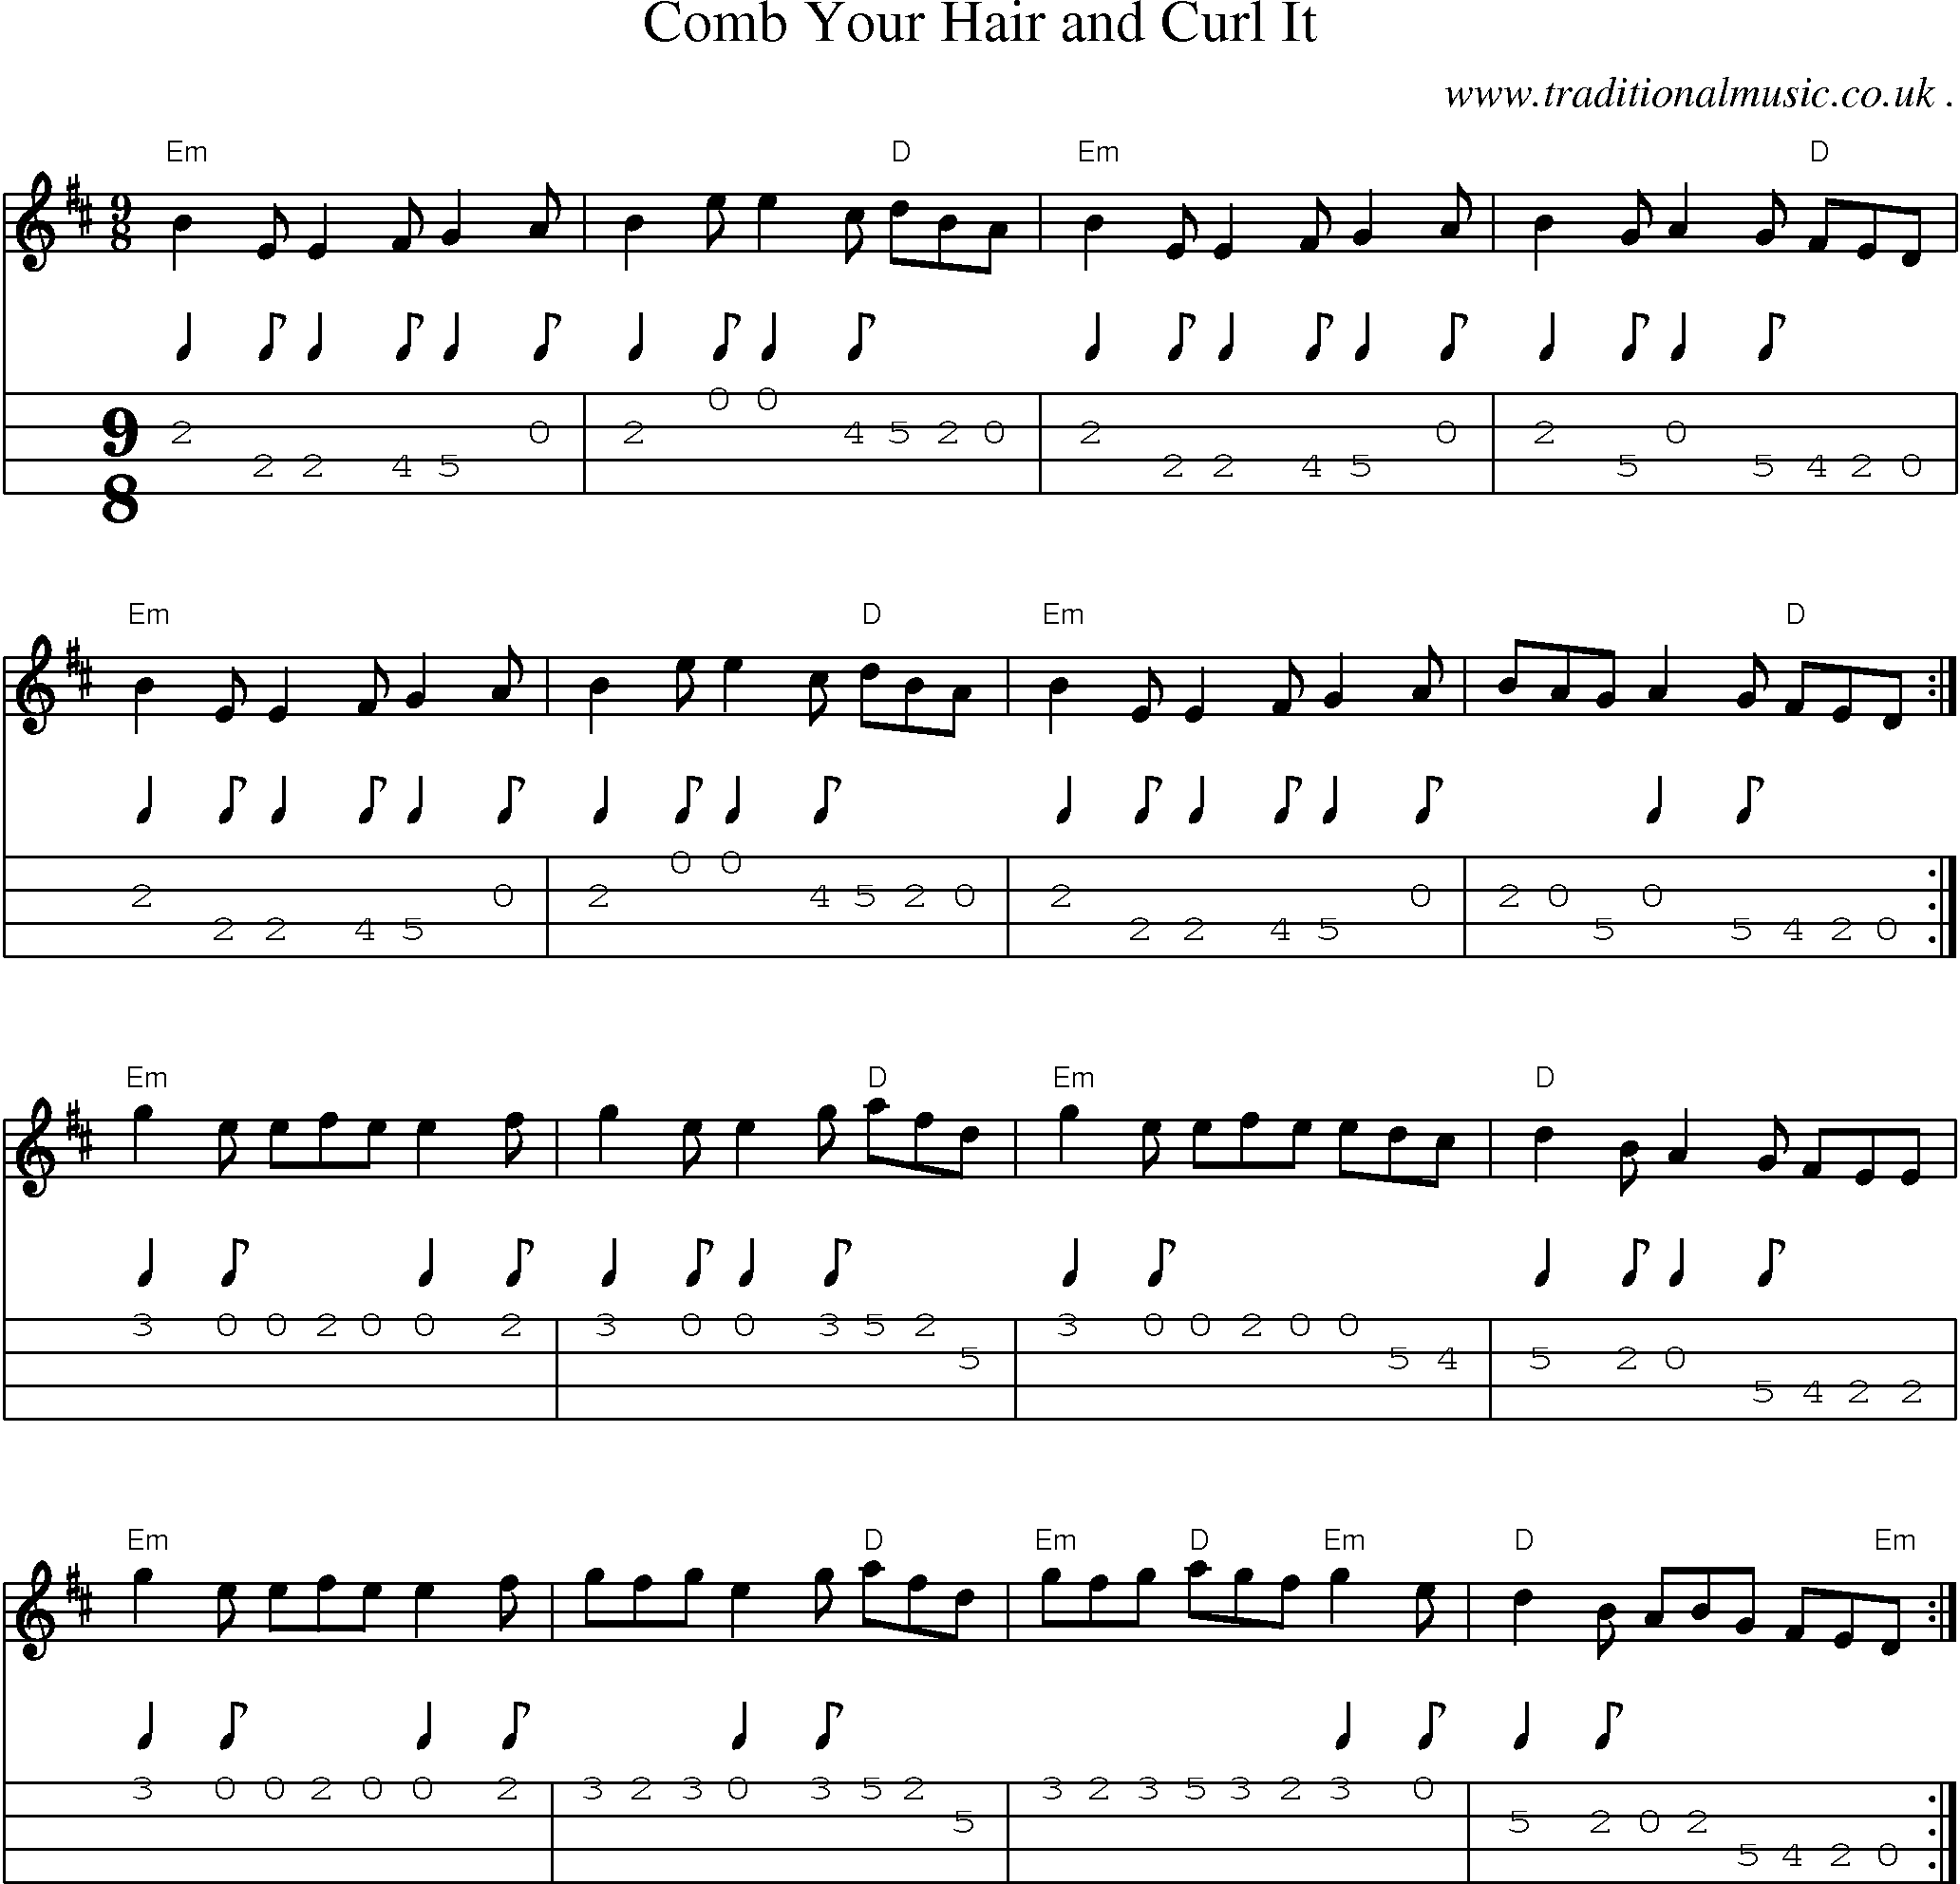 Music Score and Guitar Tabs for Comb Your Hair And Curl It